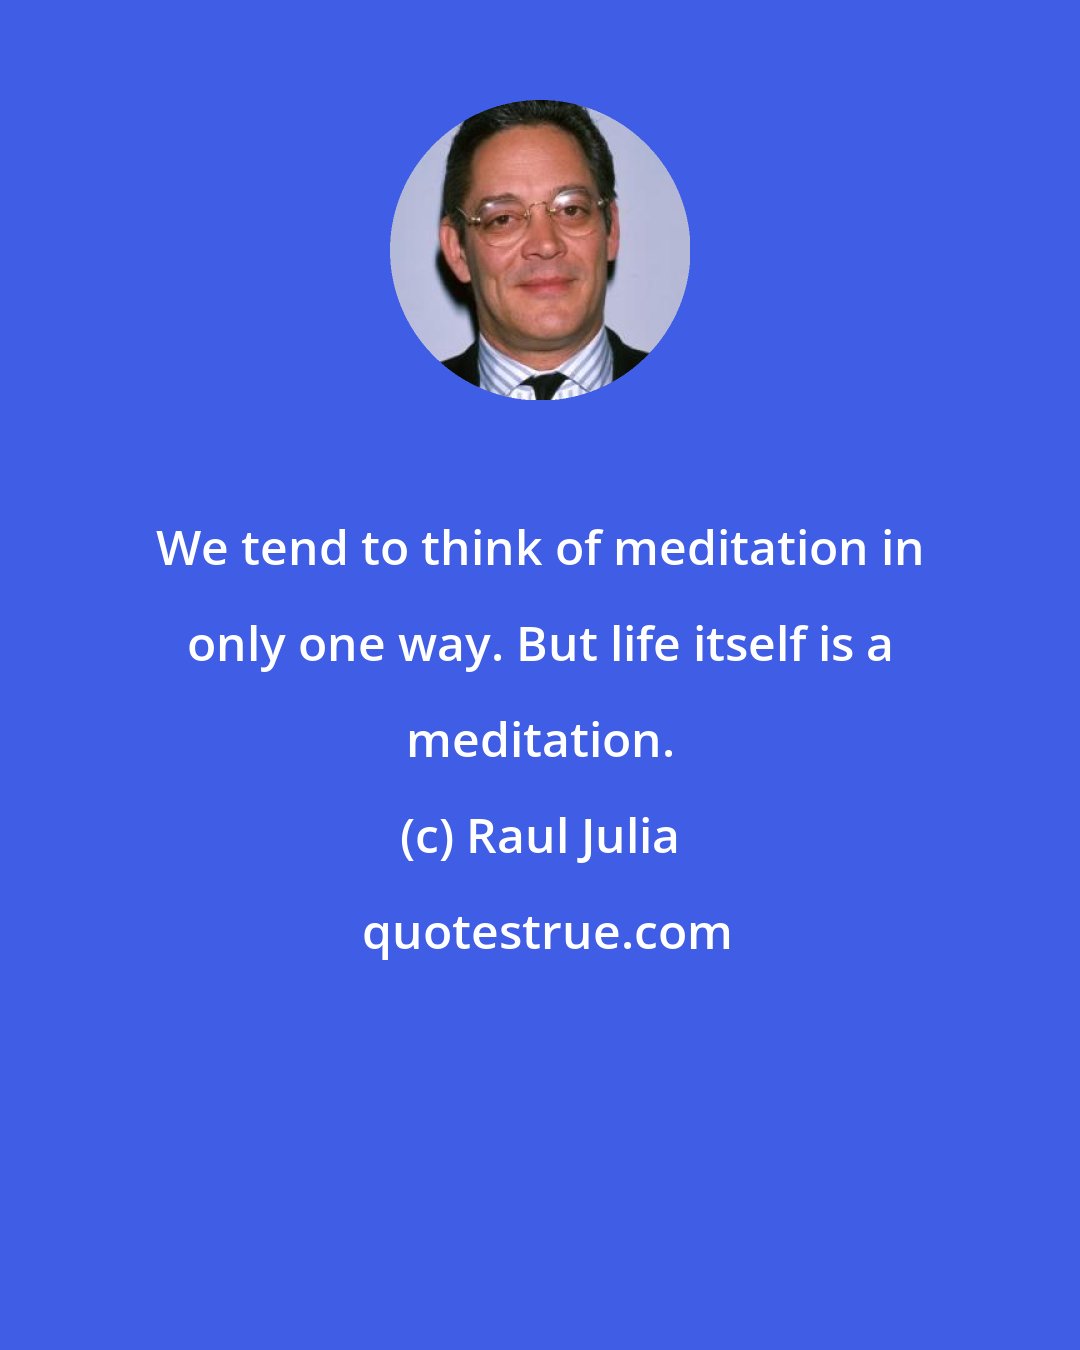 Raul Julia: We tend to think of meditation in only one way. But life itself is a meditation.